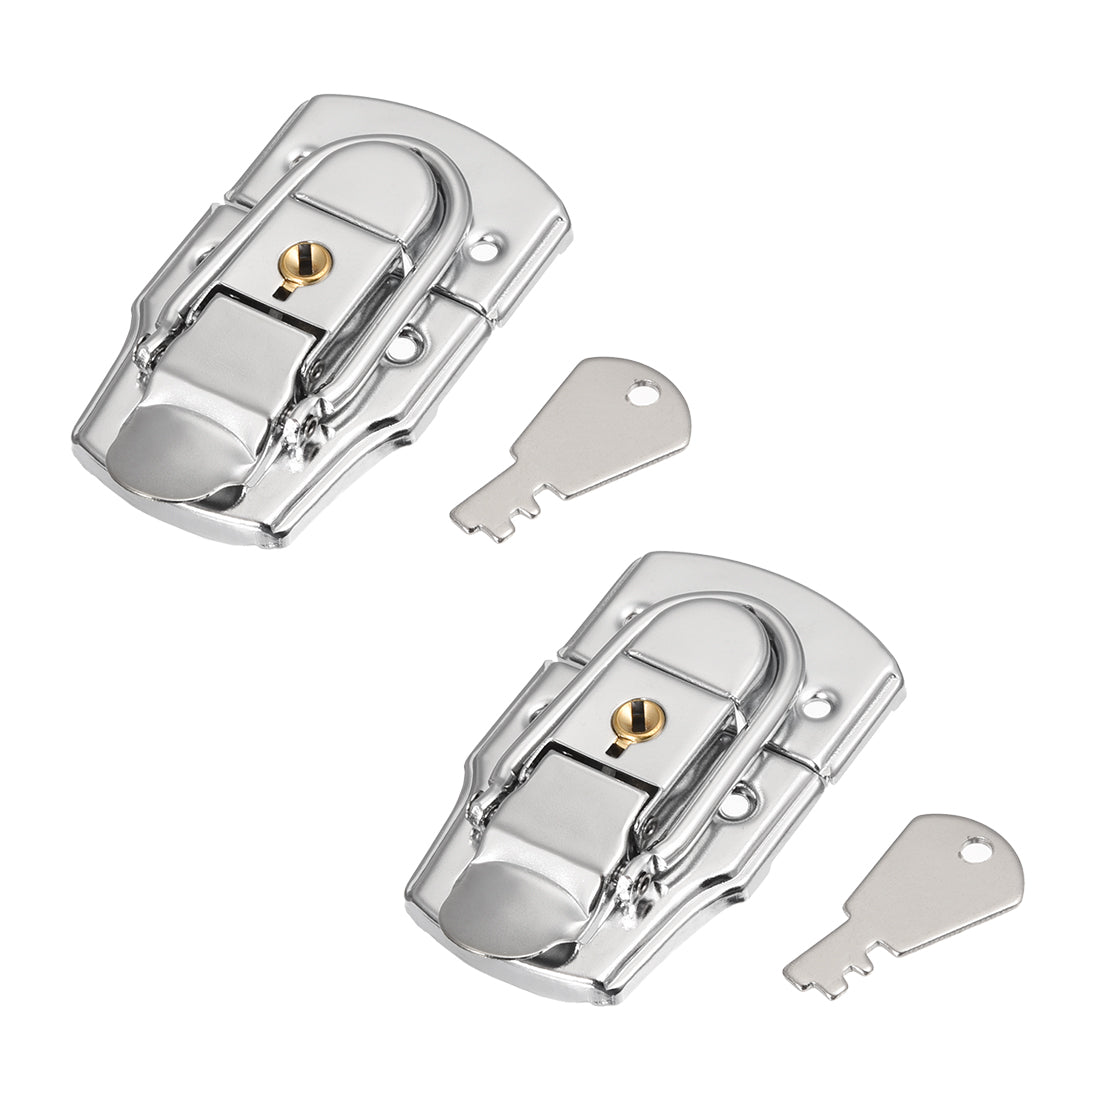 uxcell Uxcell 76mm x 45mm Metal Small Size Suitcase Lock Hasp Catch Latch with Keys 2 Pcs